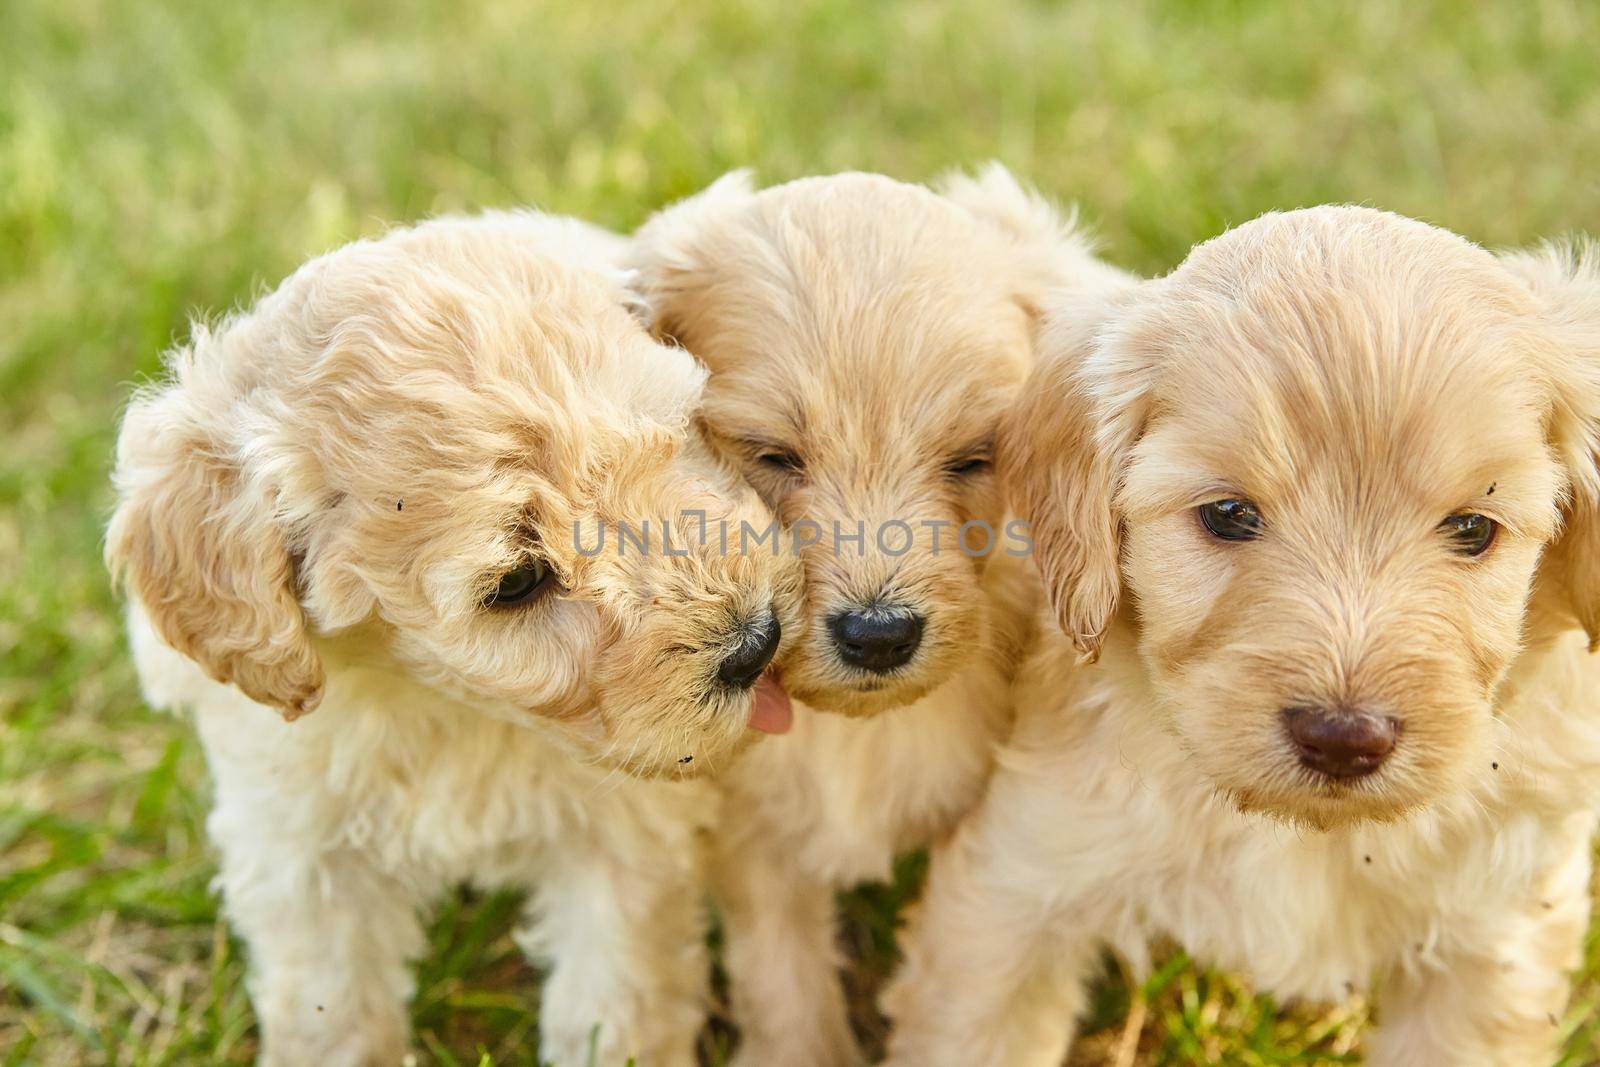 Image of Close-up of litter of three Goldendoodle puppies on grass